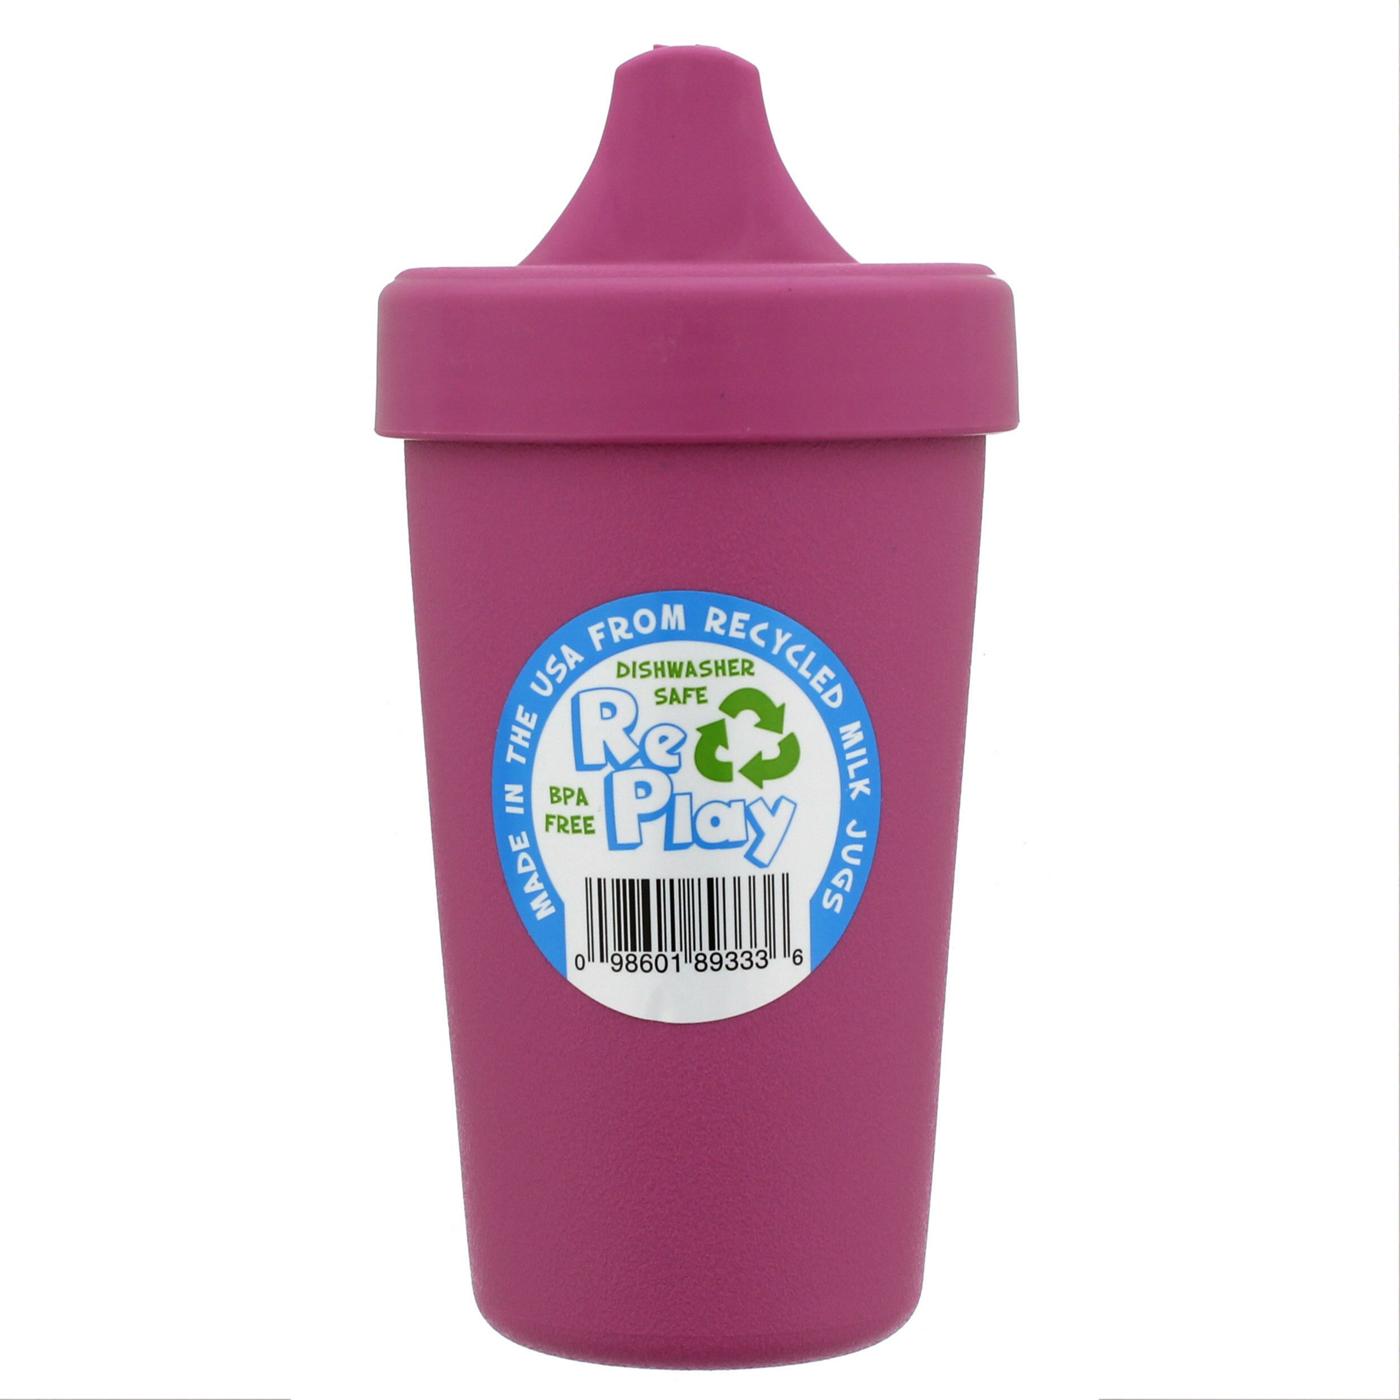 Silicone Straw Cup, Re Play Cups, Toddler Cups